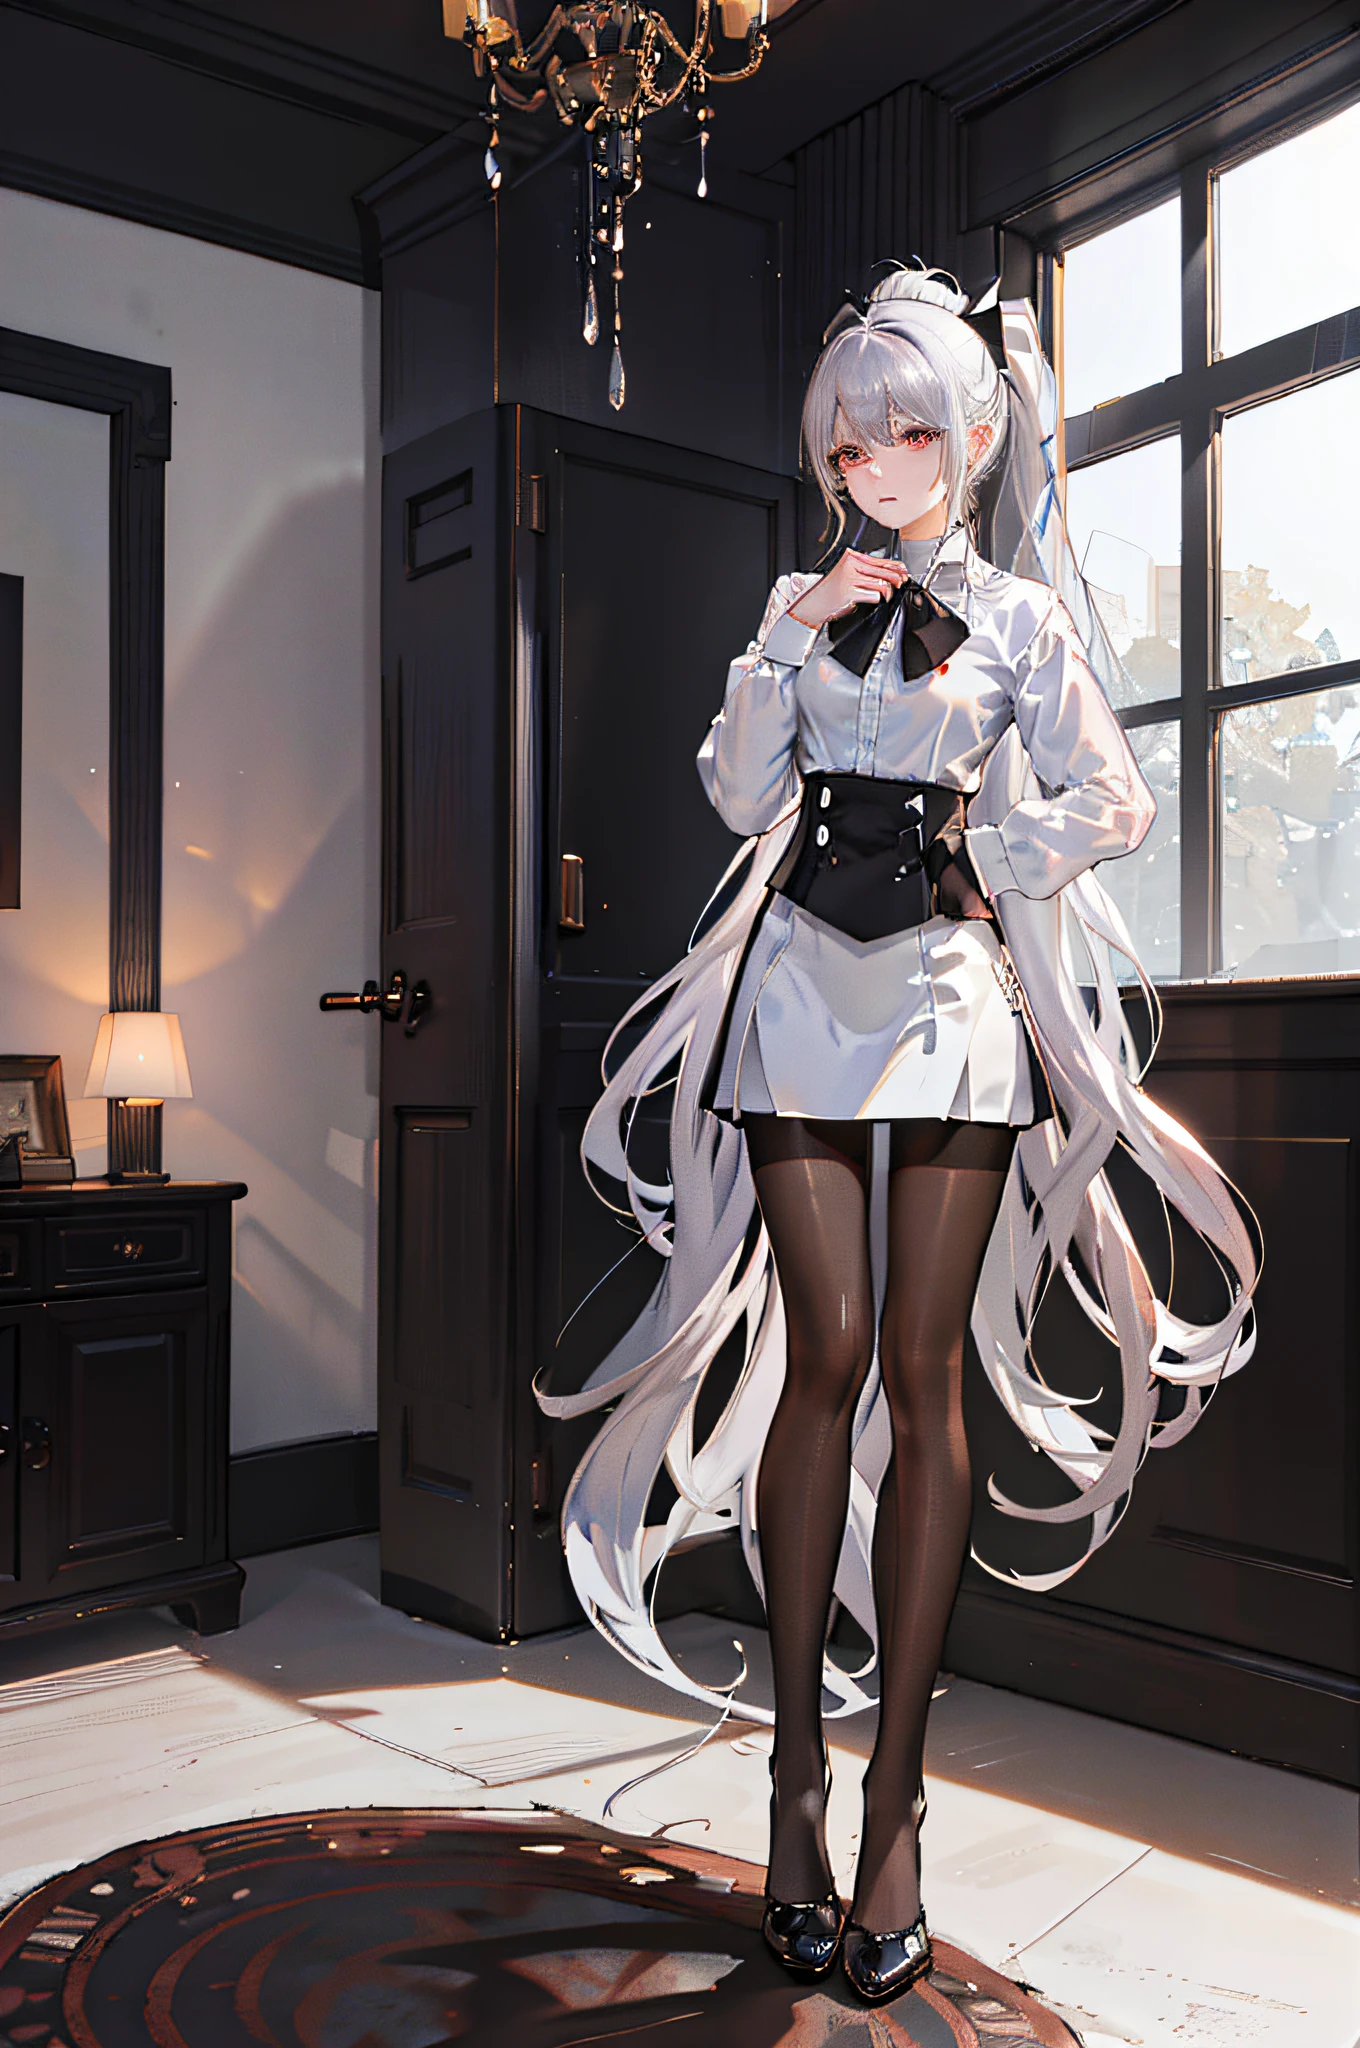 ((1 girl)),((high detailhyper quality,high resolution,))),(epic detail)),((soft shadows)),(ray tracing),{best shadow}, detailed background, ((living room)),((fluffy silver hair, busty slender girl with high ponytail)))), [avoid golden eyes in an ominous living room], (((Girl wearing white shirt, black wrinkled skirt with black transparent pantyhose))), {shows a delicate slim figure and graceful curves}, ((front)), (Standing), ((Hands hidden behind the head))))), (Facial details)